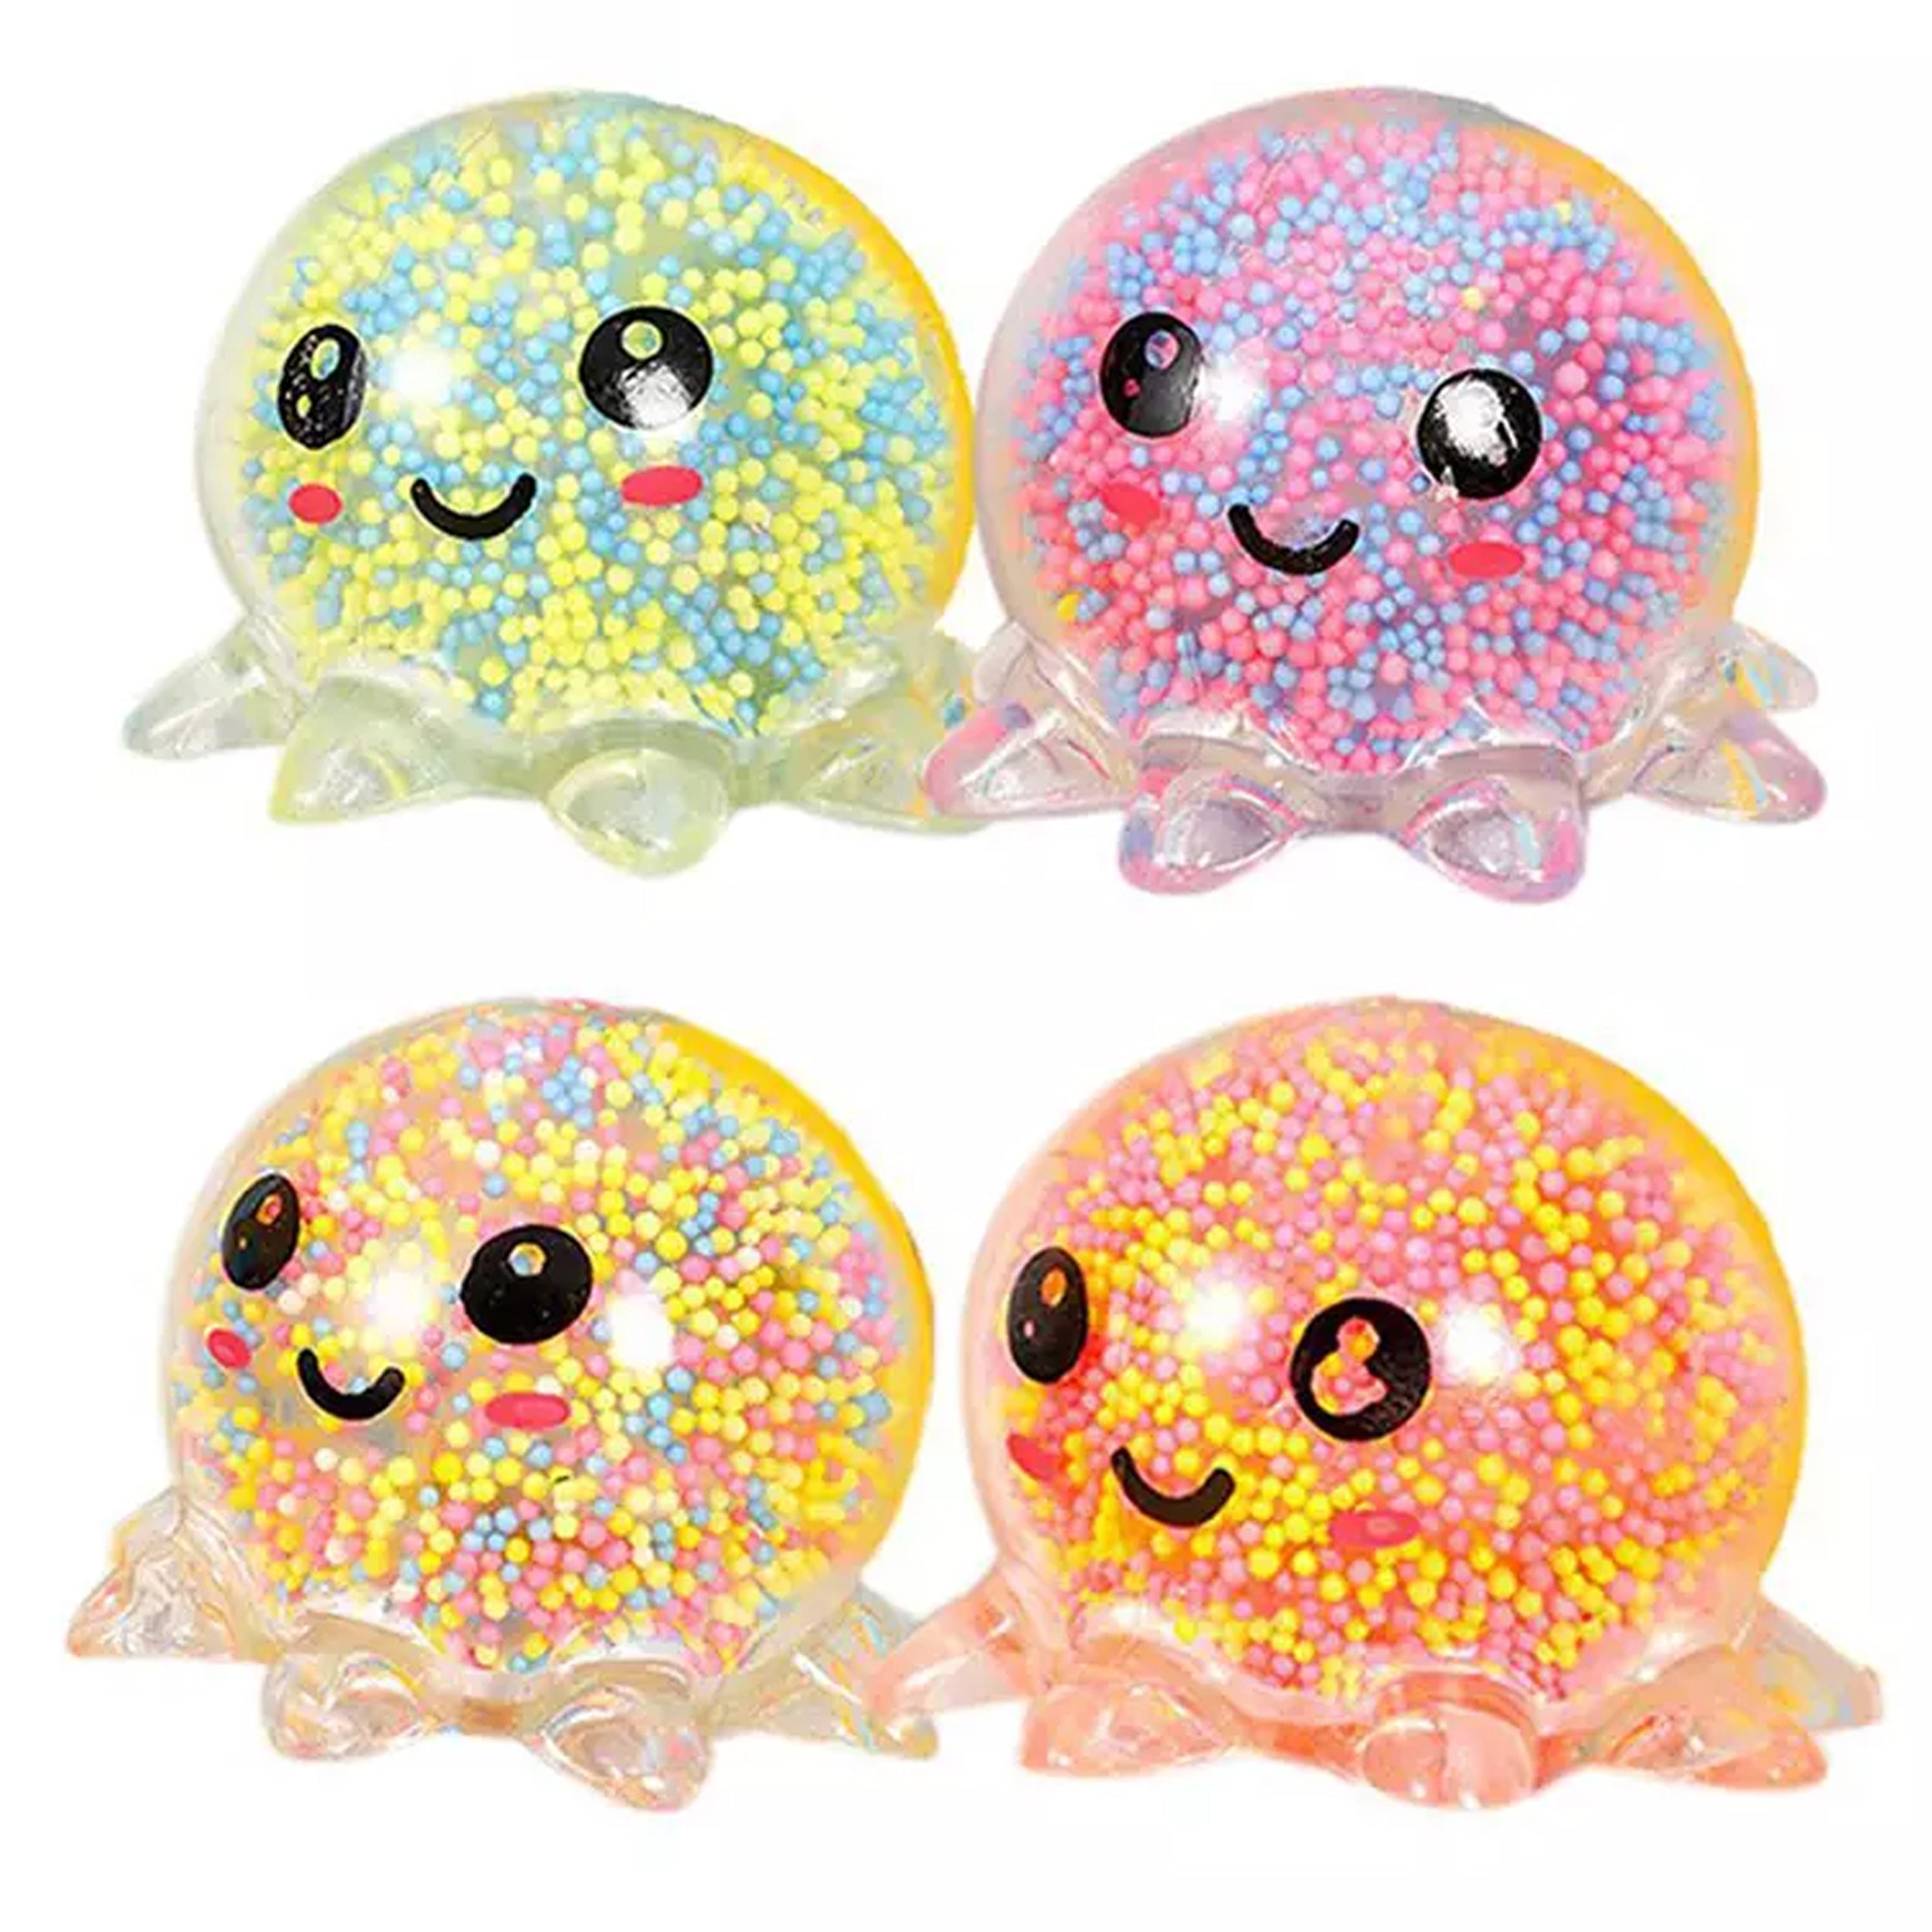 Squishy Octopus Toy for Kids